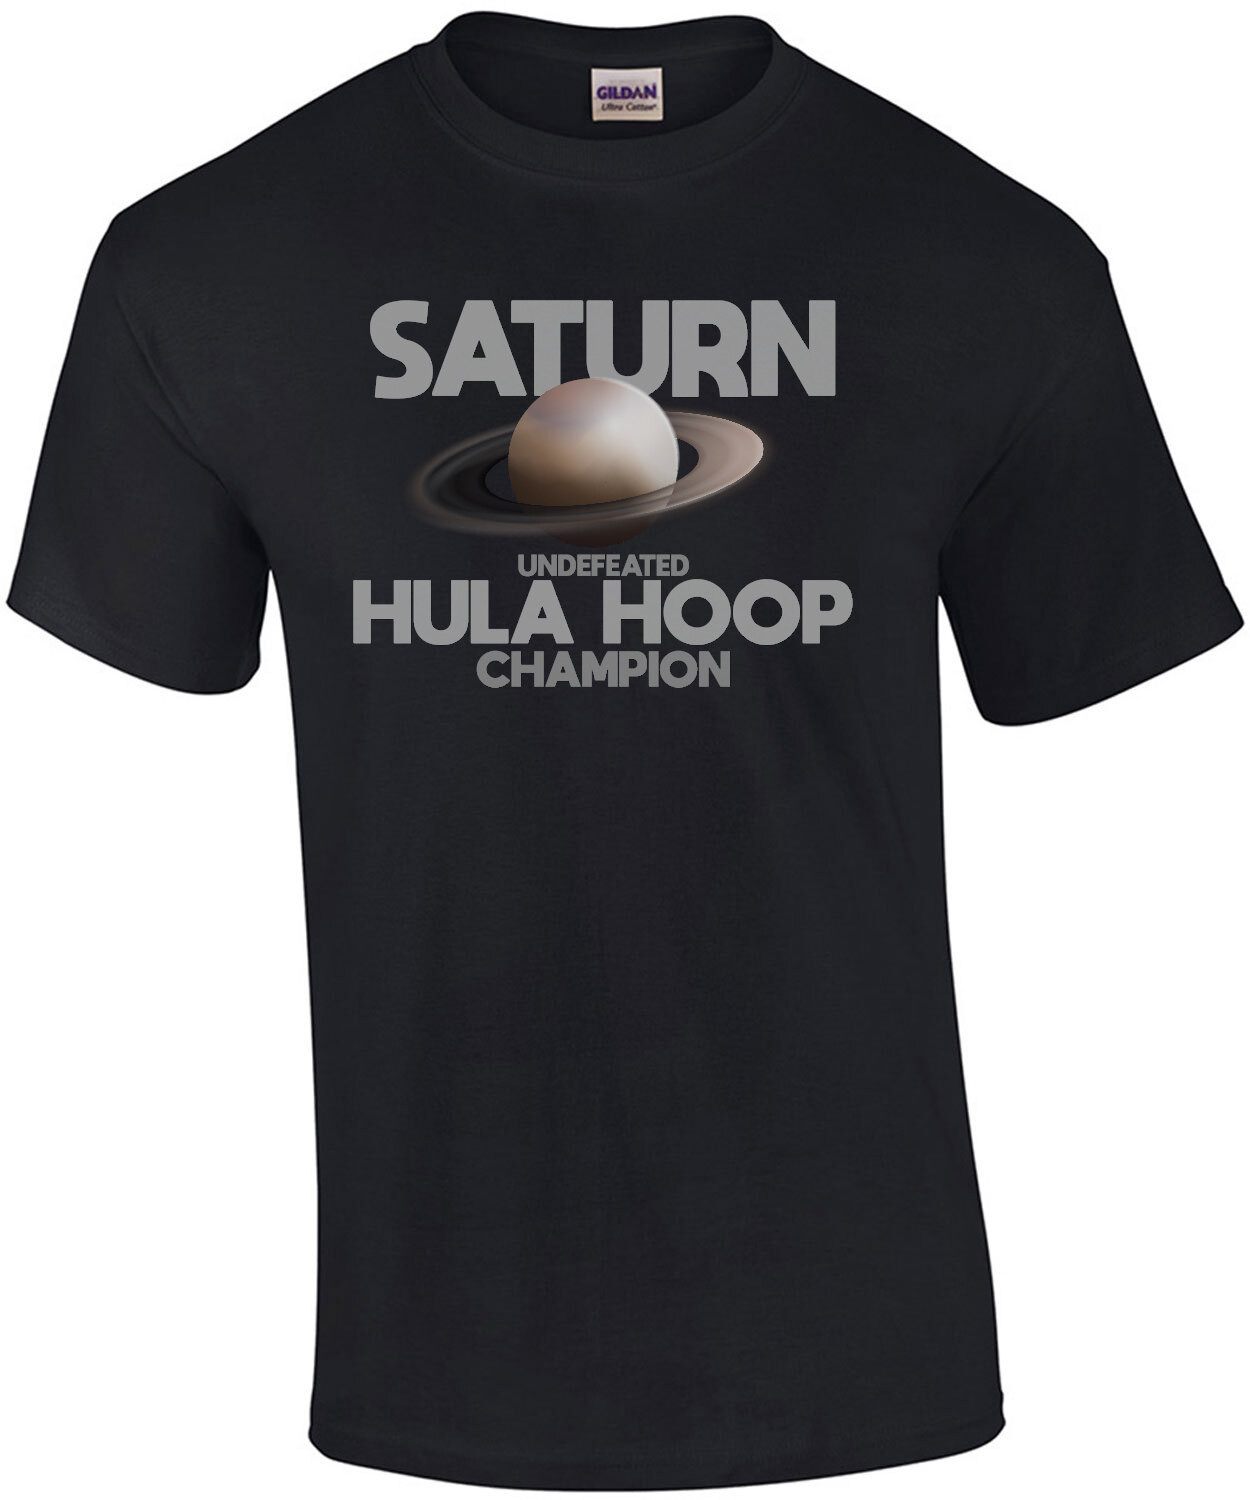 Saturn - Undefeated Hula Hoop Champion - Funny T-Shirt